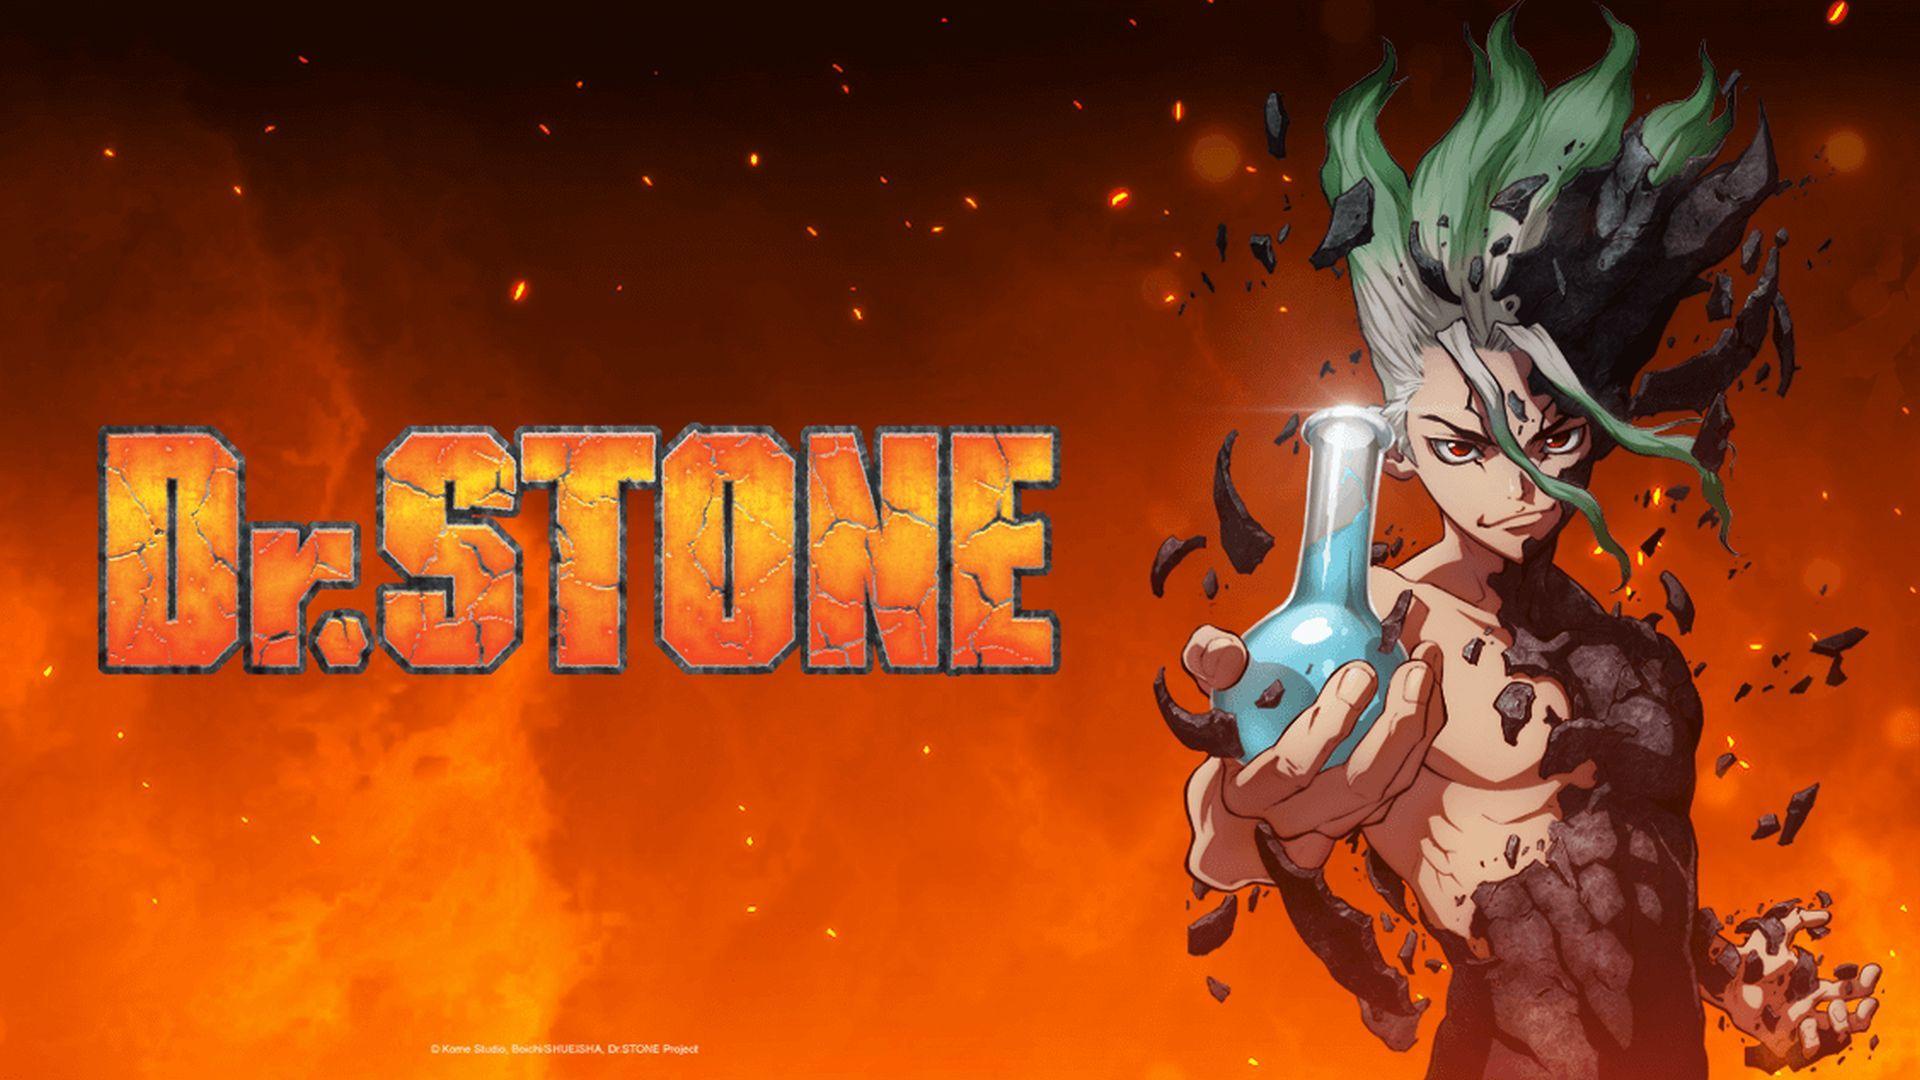 Dr. Stone Wallpapers - Top Free Dr. Stone Backgrounds ...